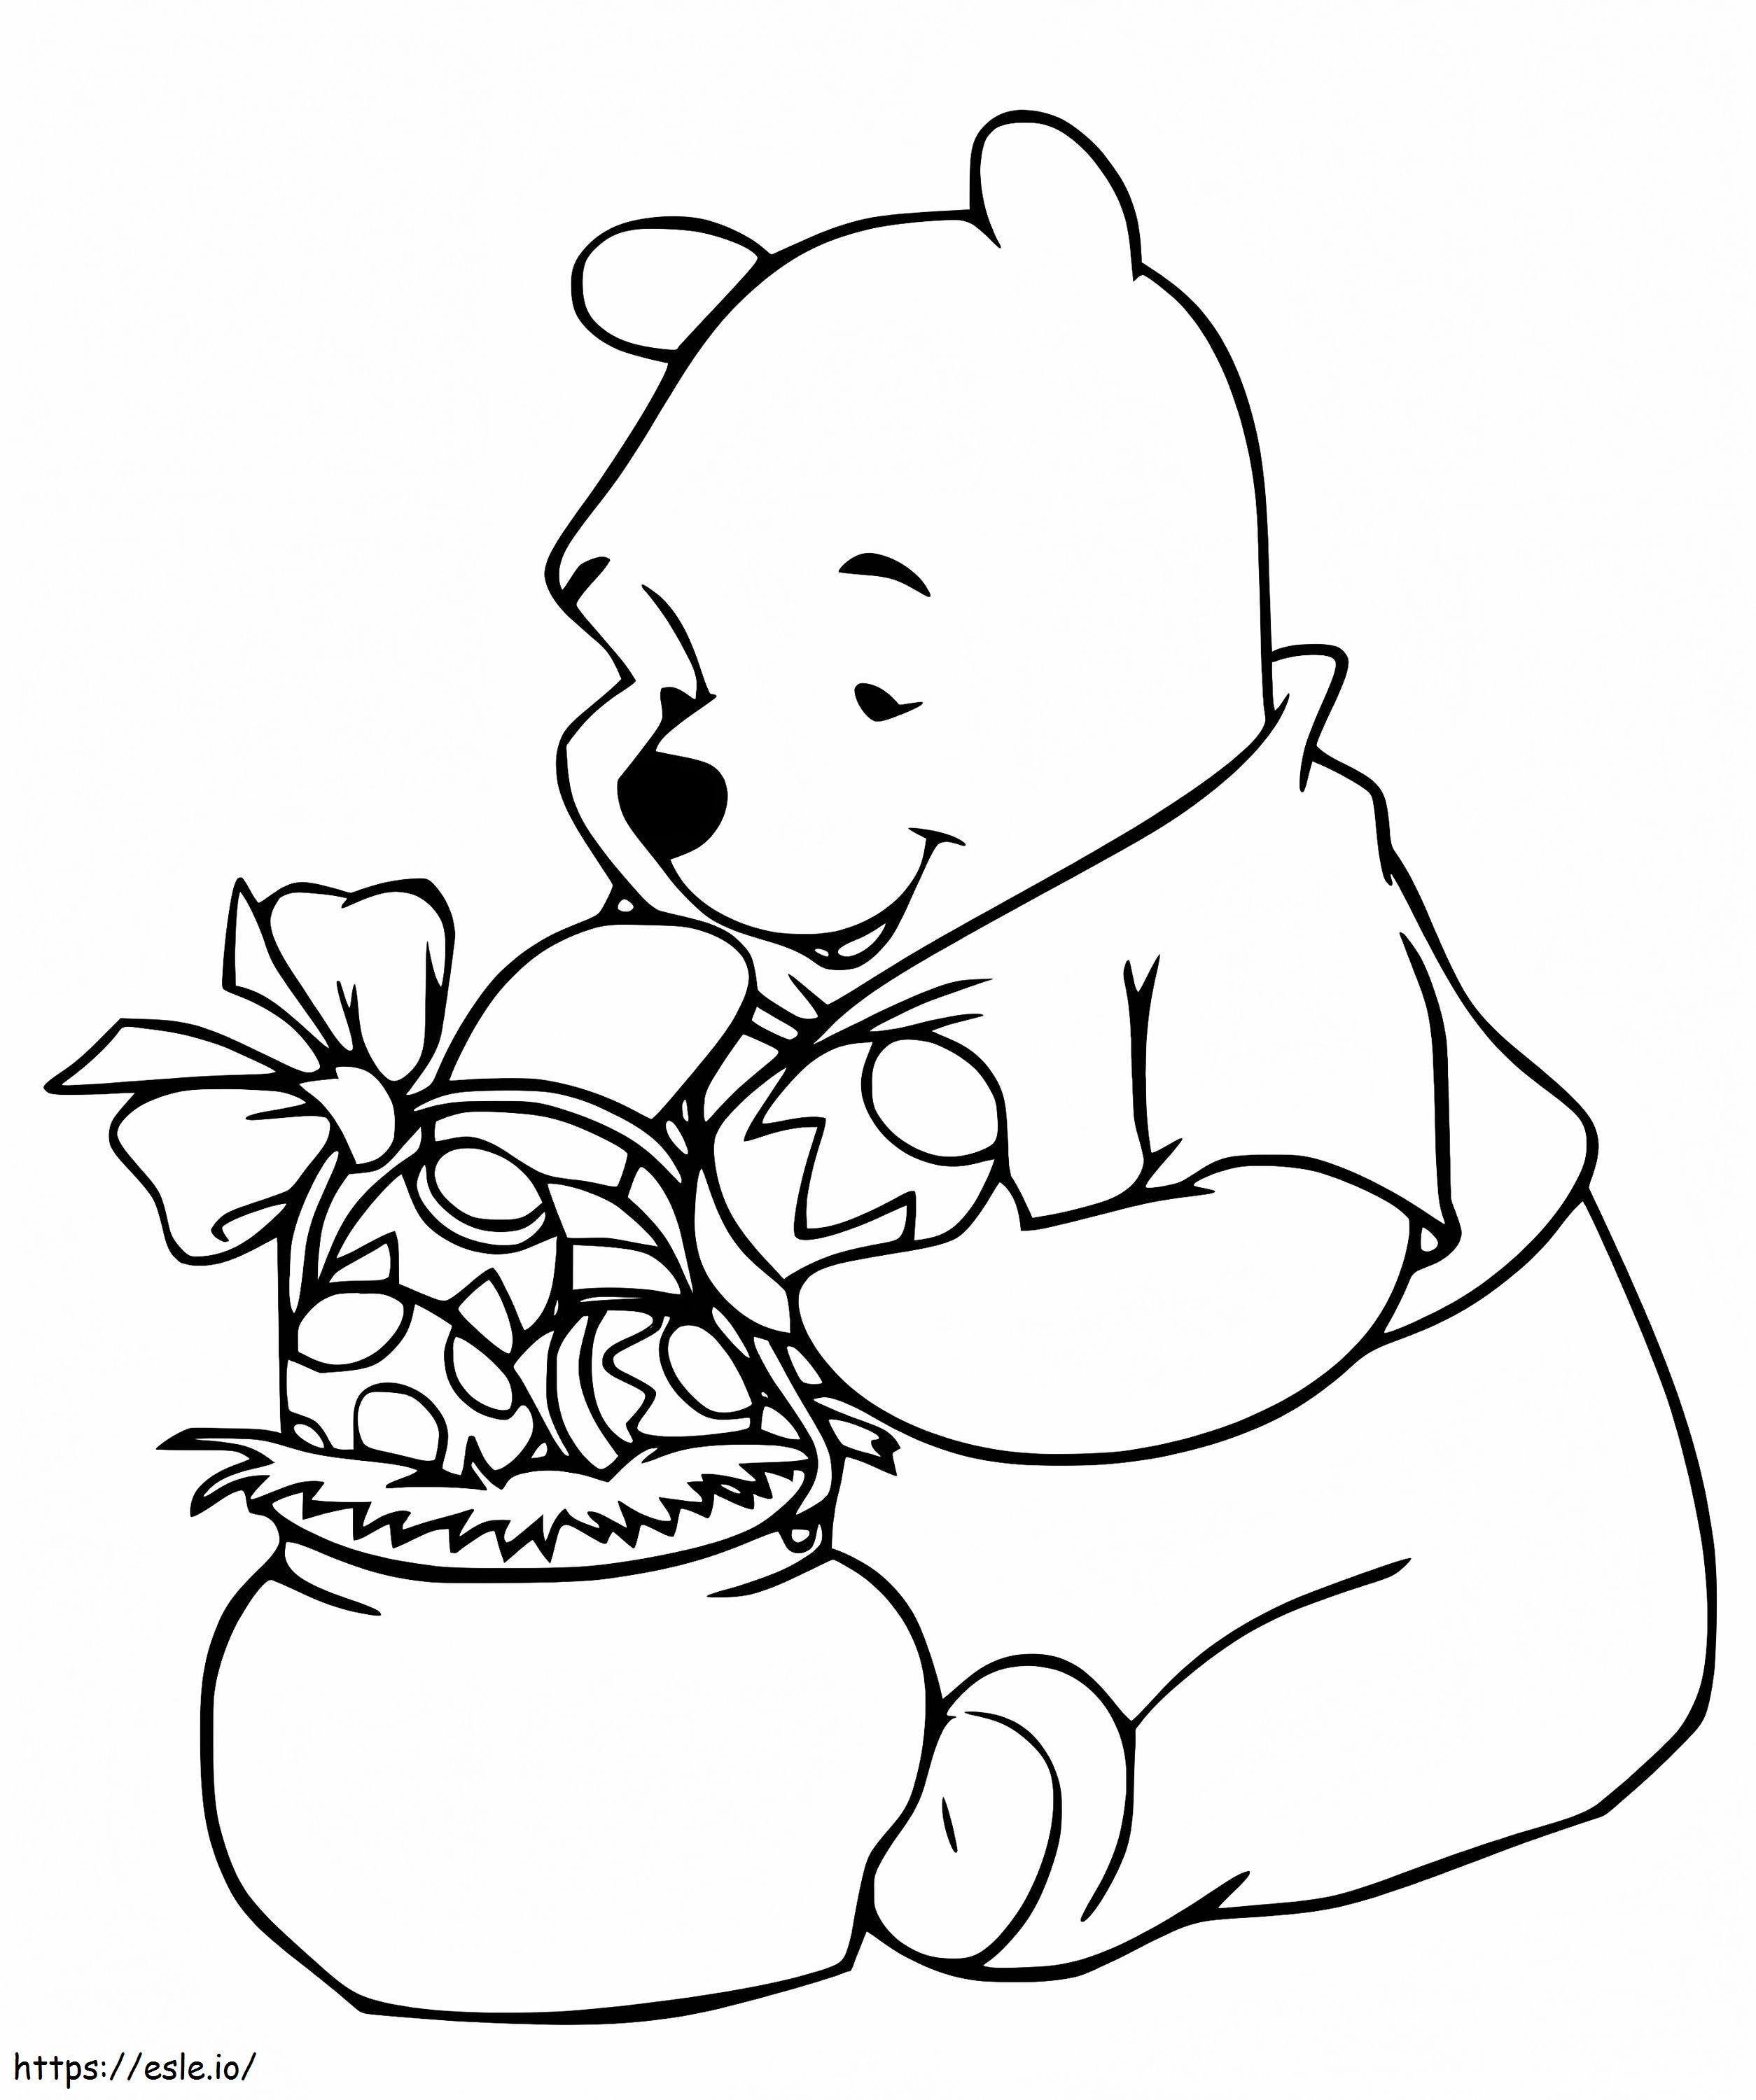 Winnie The Pooh With Easter Basket coloring page